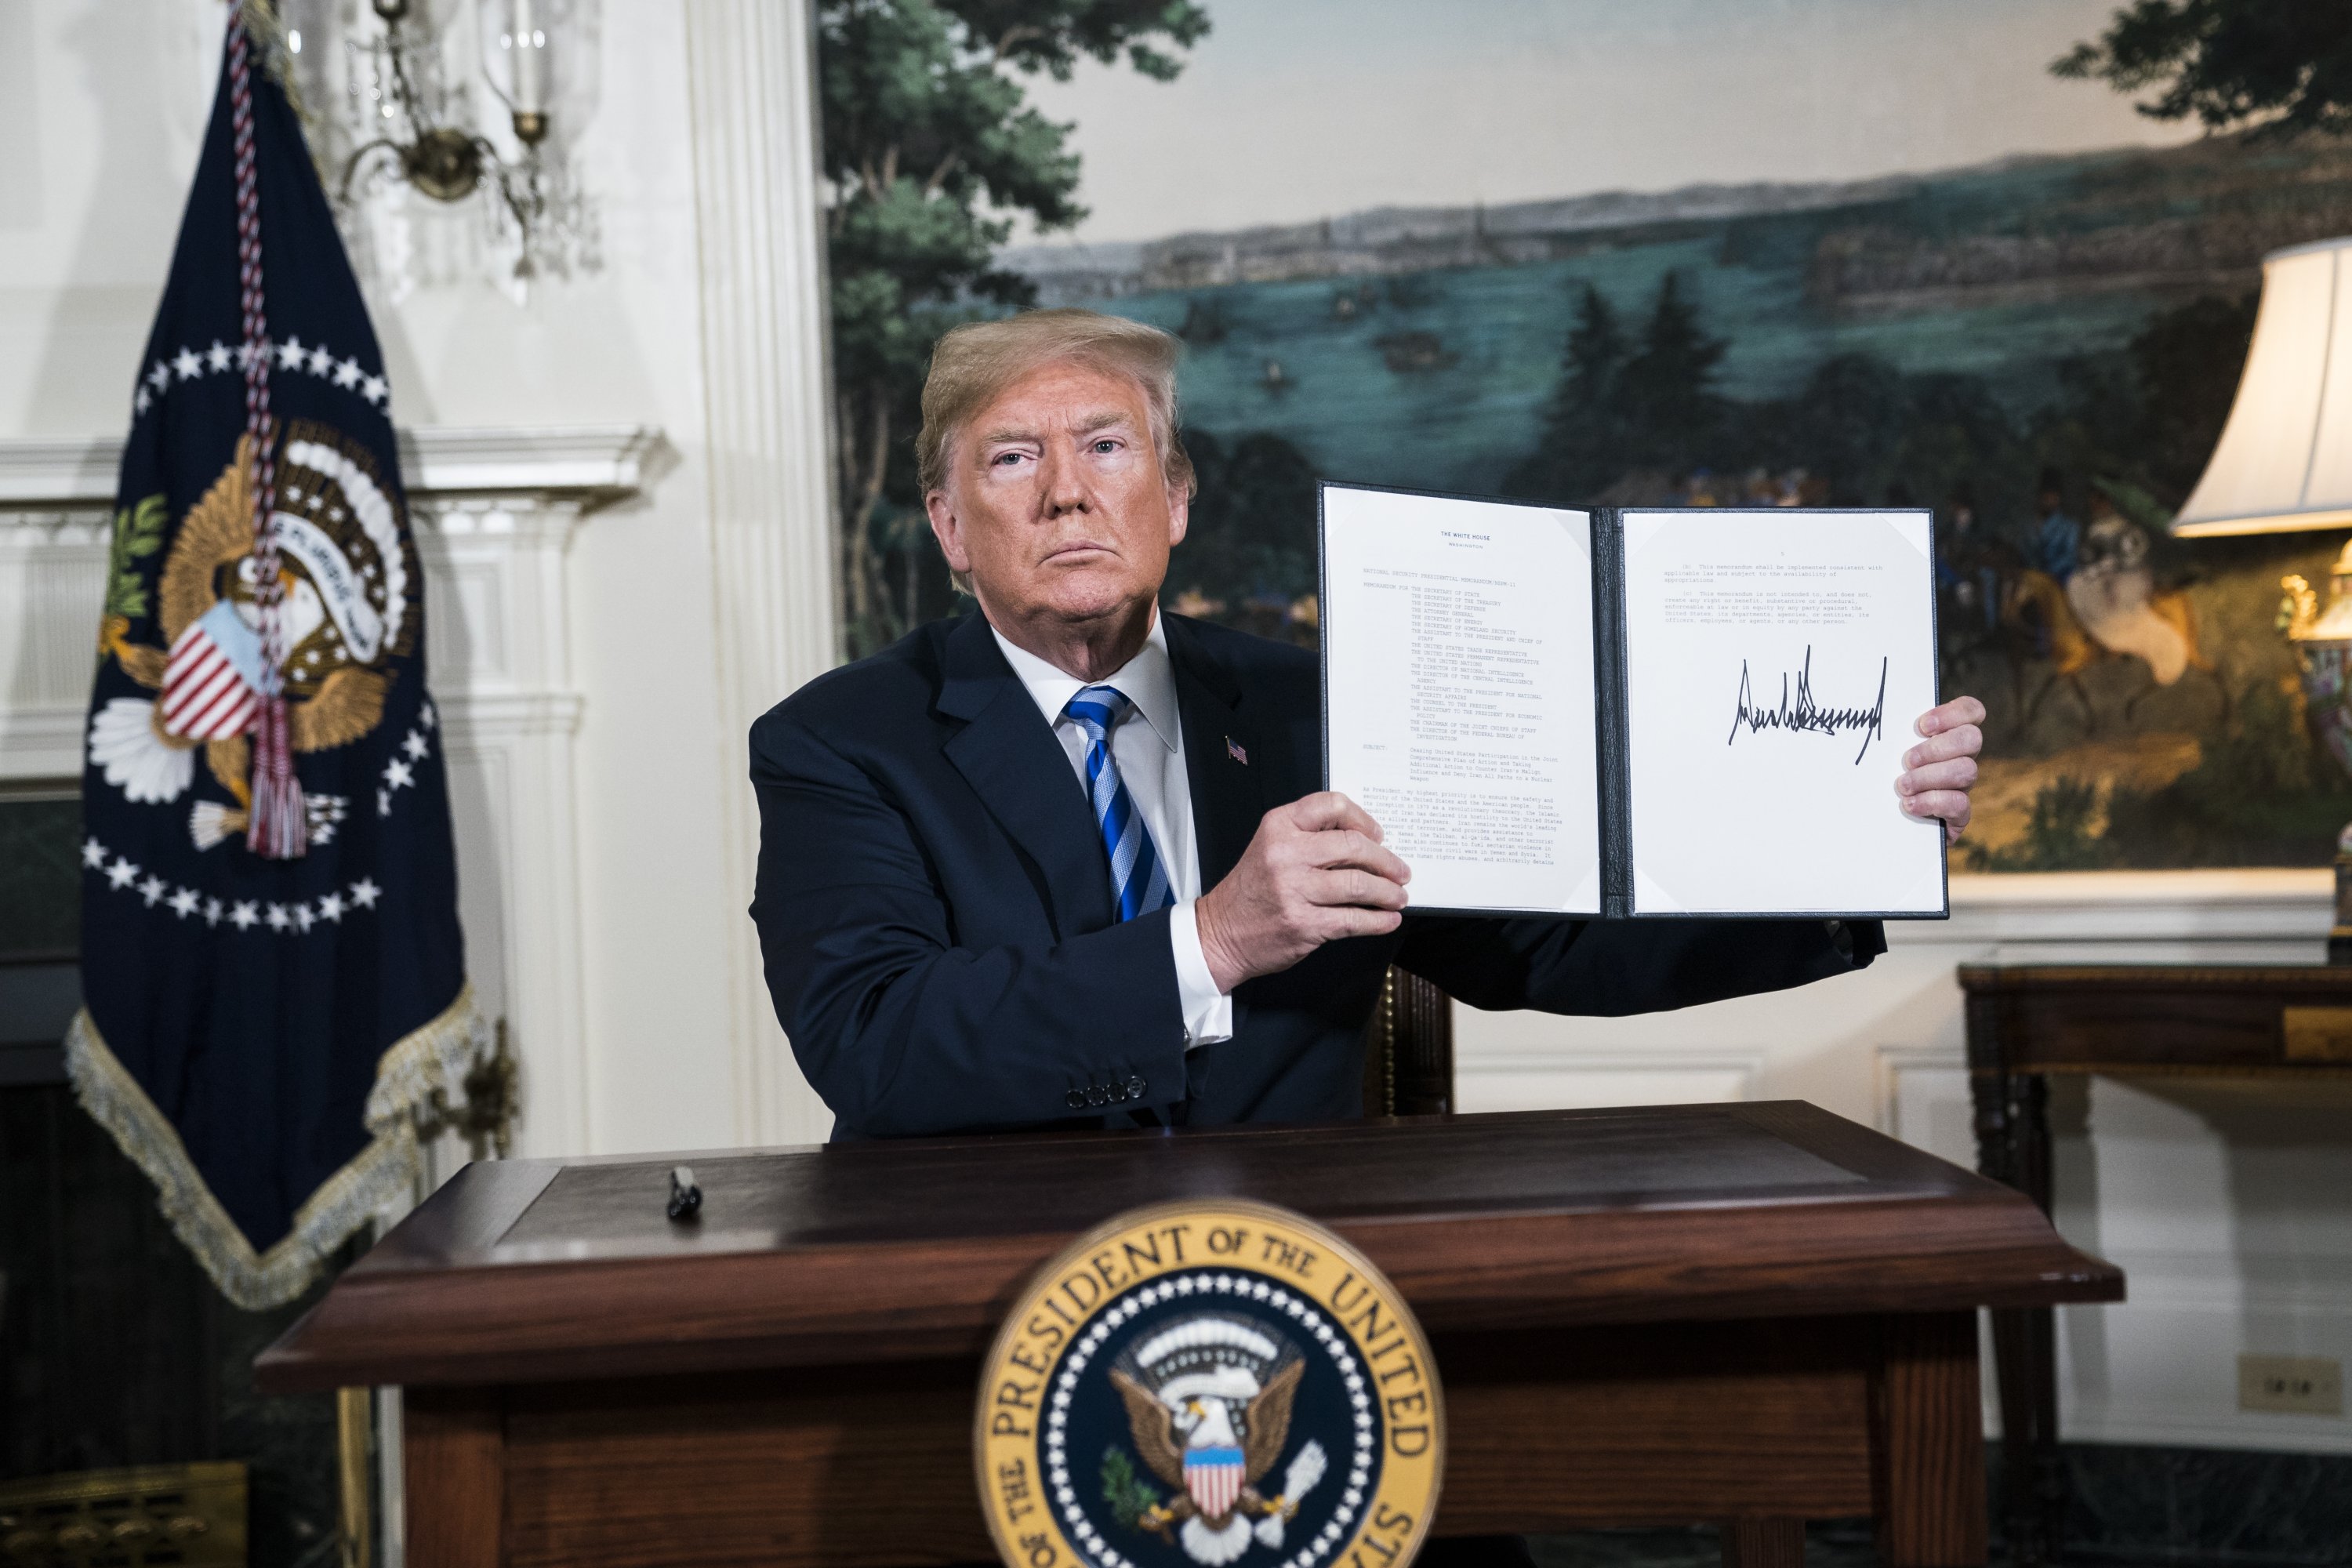 Then-U.S. President Donald Trump signs a presidential memorandum as he announces the U.S. withdrawal from the Iranian nuclear deal, at the White House, Washington, D.C., U.S., May 8, 2018. (Photo by Getty Images)